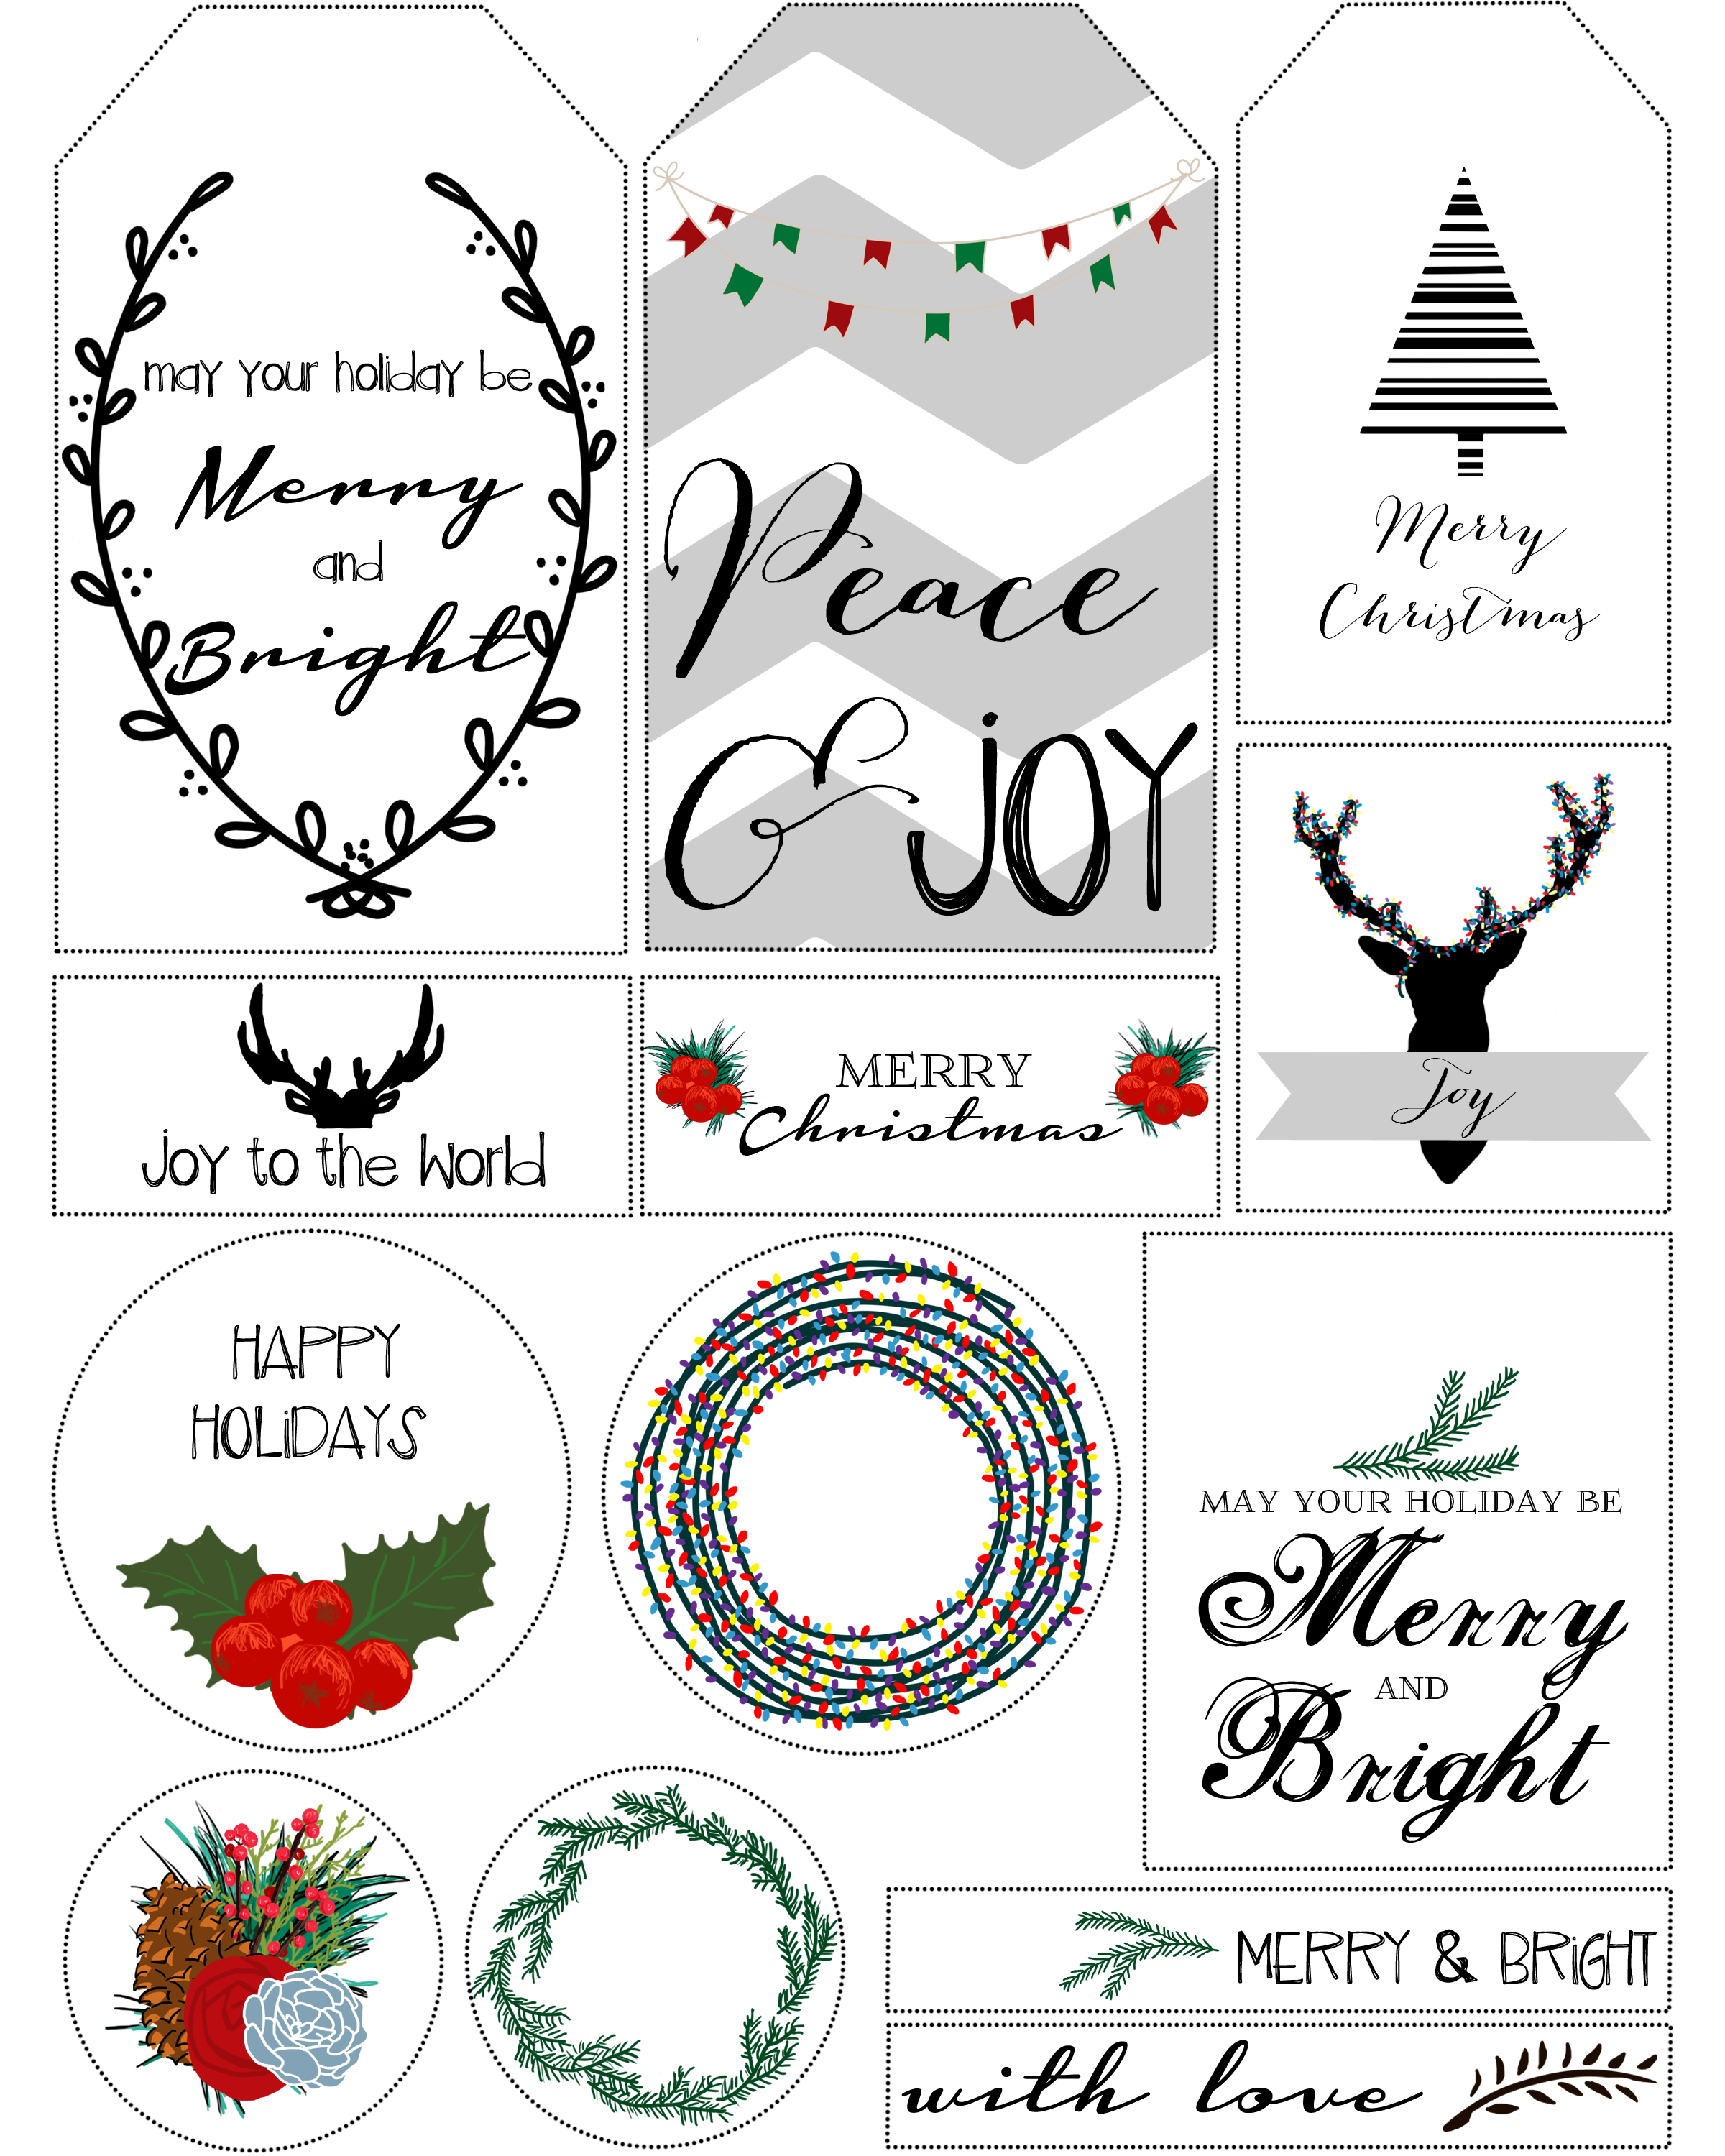 Gift Printable Images Gallery Category Page 1